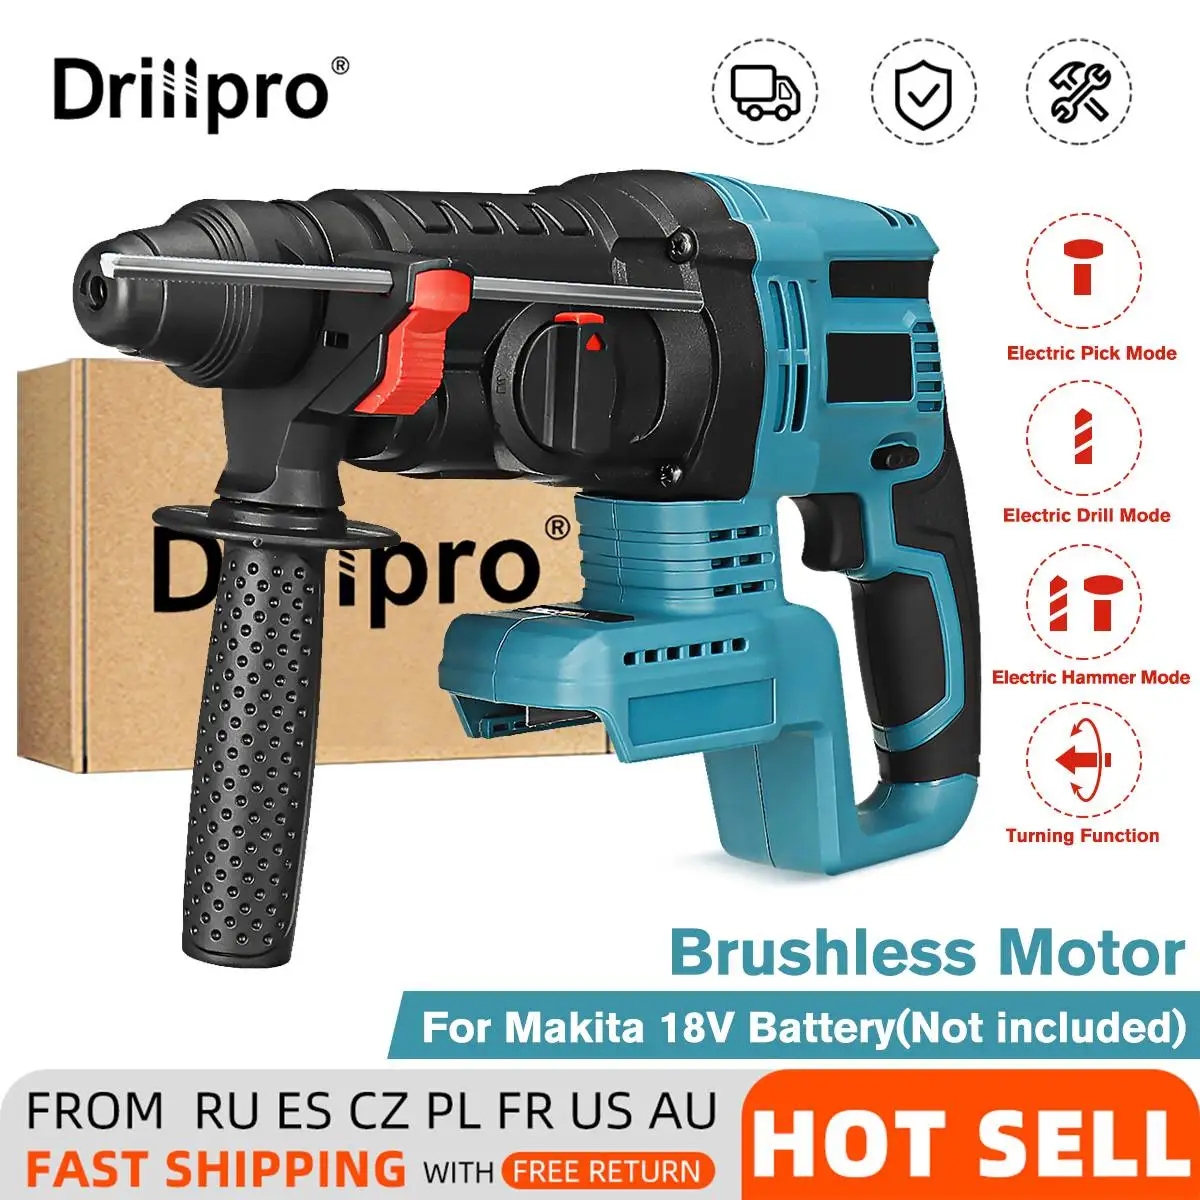 

Drillpro 18V Rechargeable Brushless Cordless Rotary Hammer Drill Electric Demolition Hammer Impact Drill for Makita 18V Battery